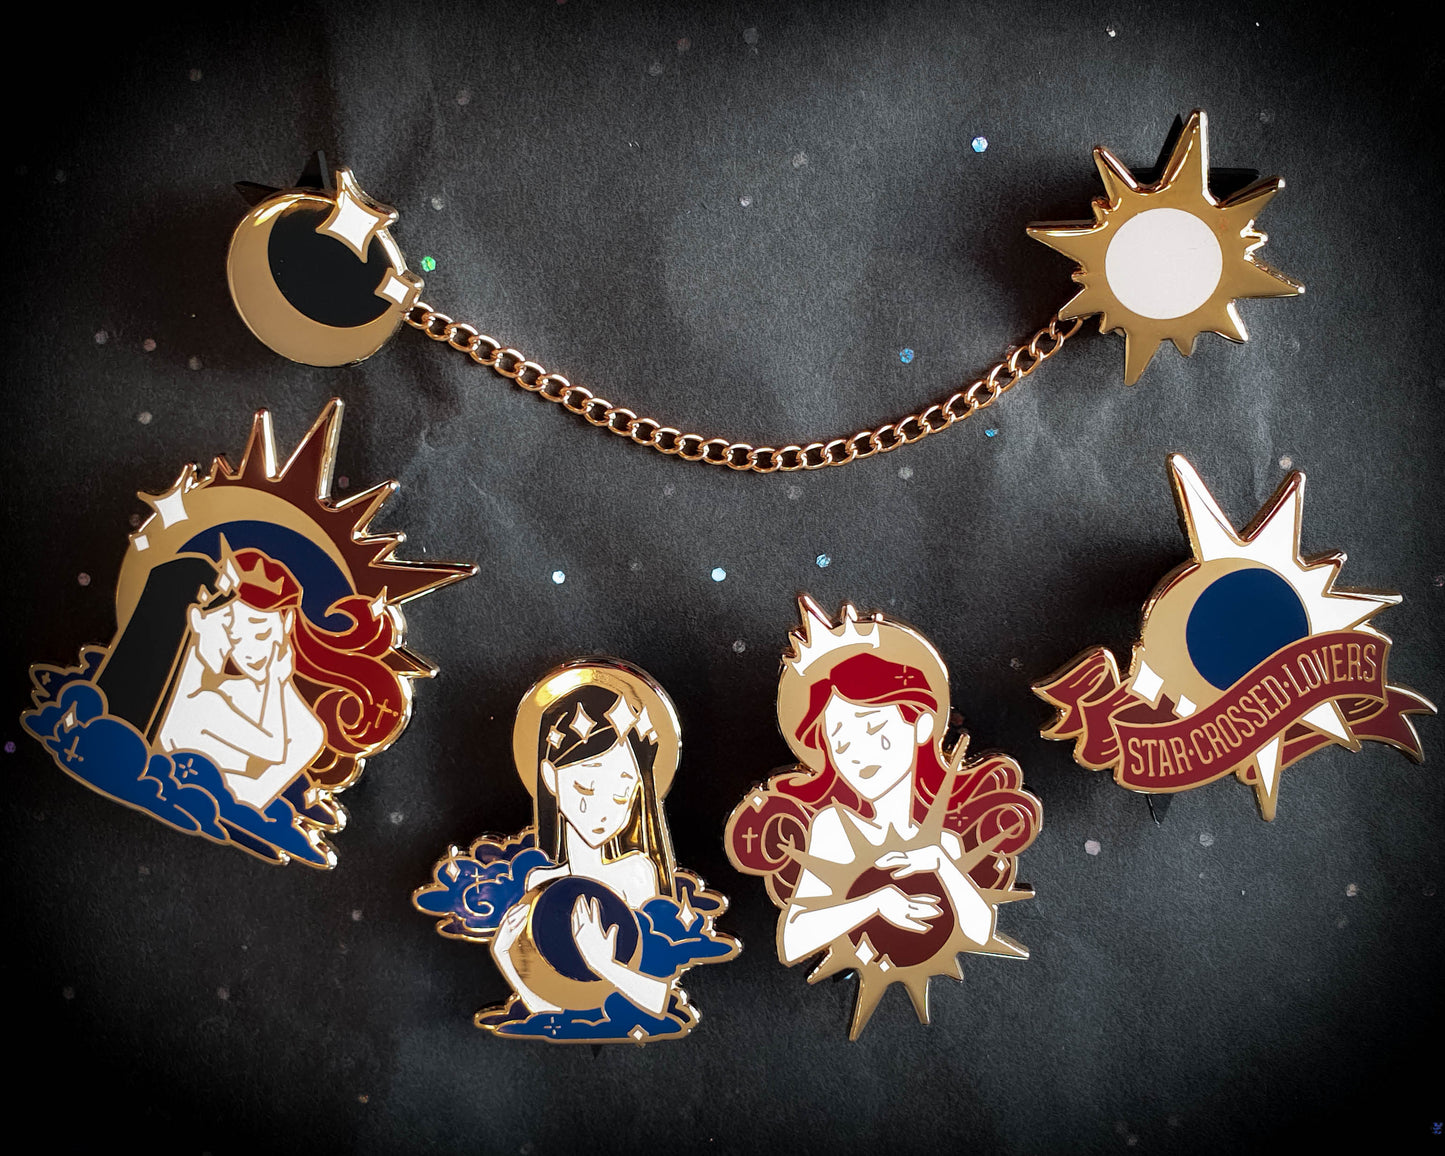 The Sun - Hard Enamel Pin - Star-crossed Lovers (Collaboration by Astermorn and Annadrawsstuff)